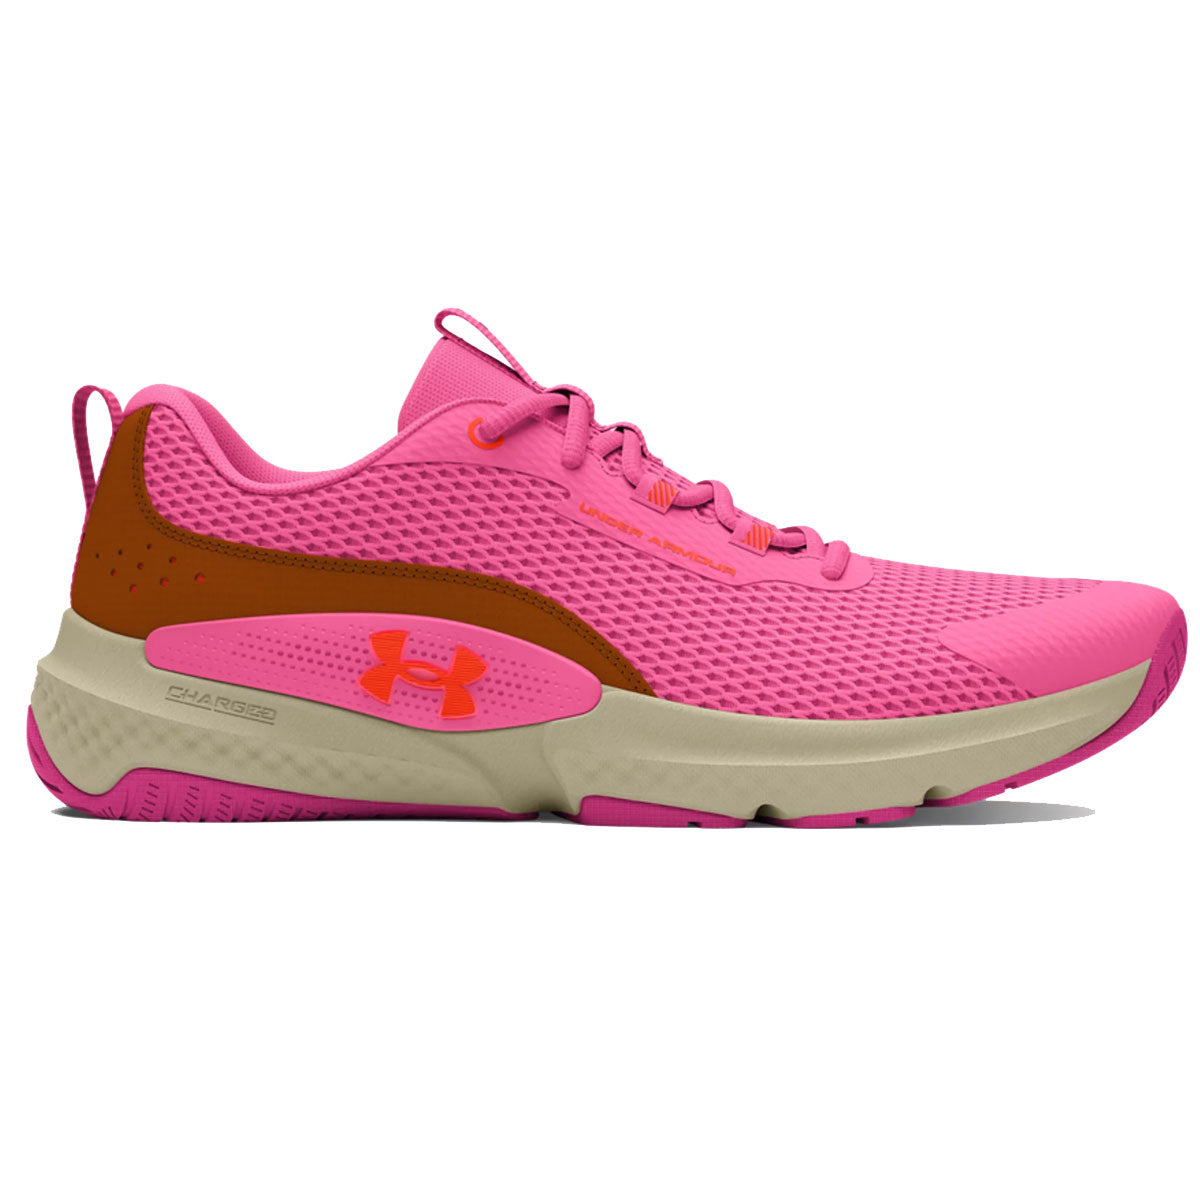 Under Armour Dynamic Select Training Shoes - Womens - Pink/Copper Penny/Phoenix Fire